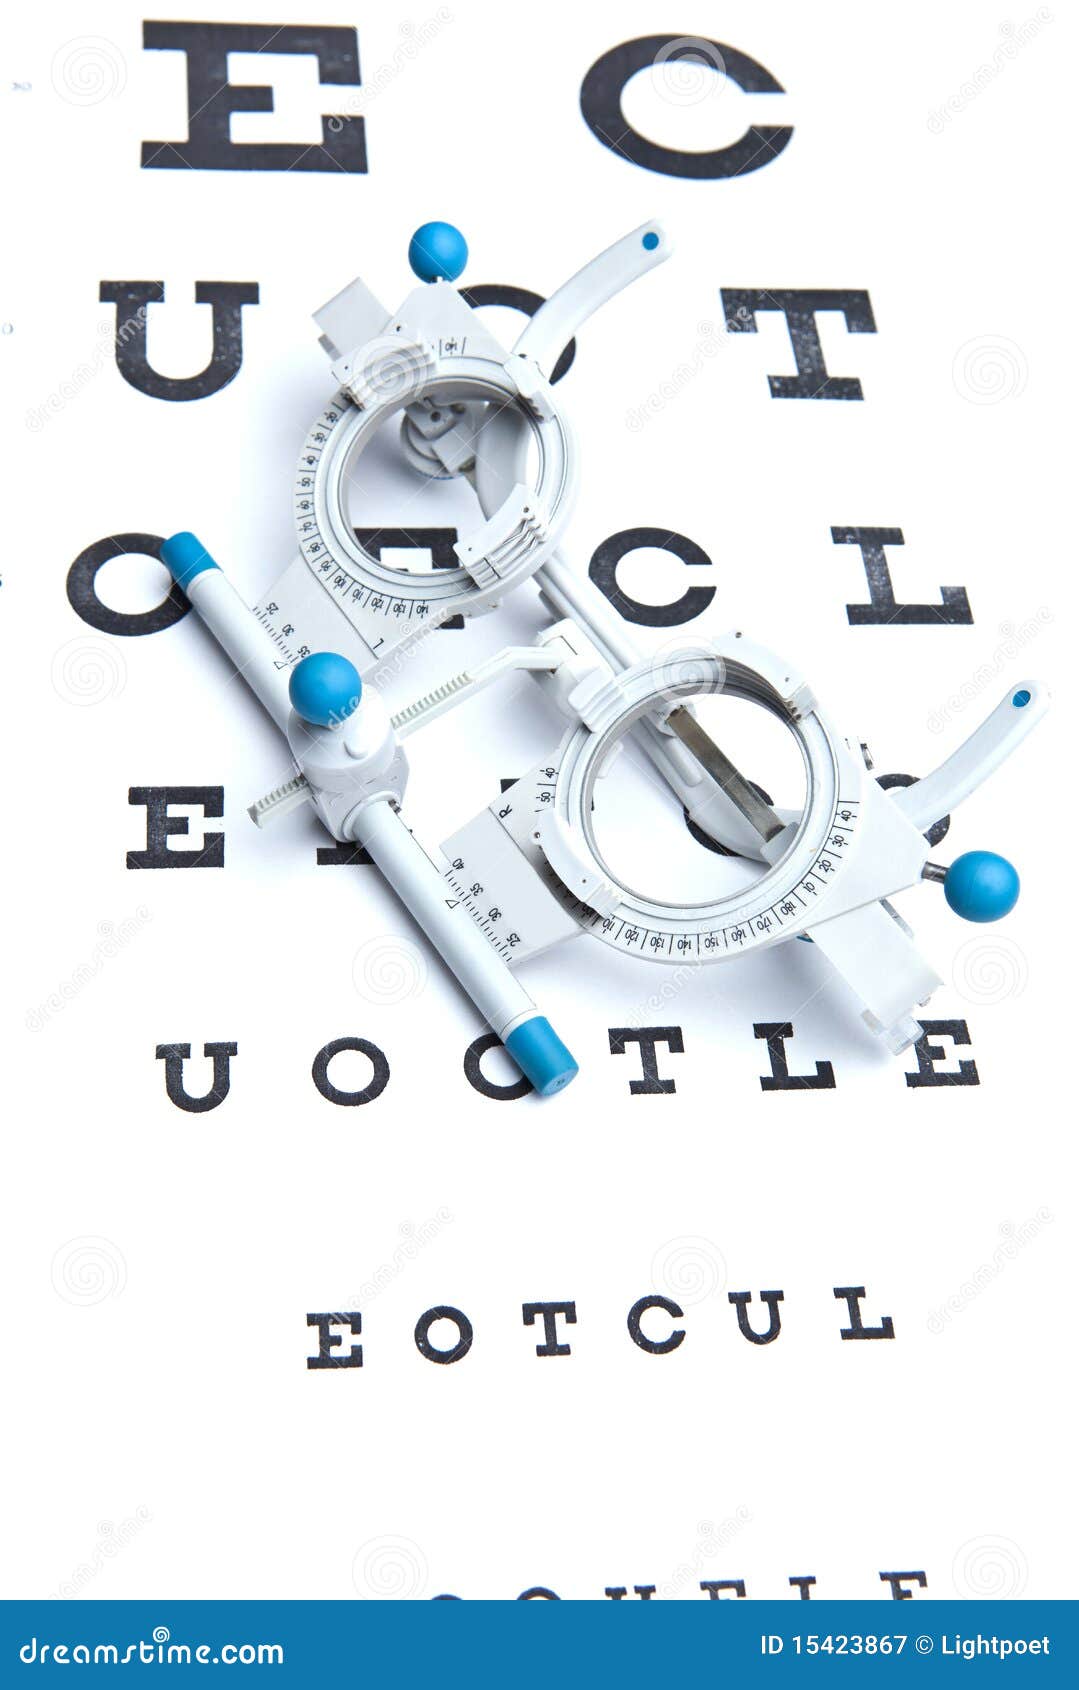 sight measuring spectacles & eye chart